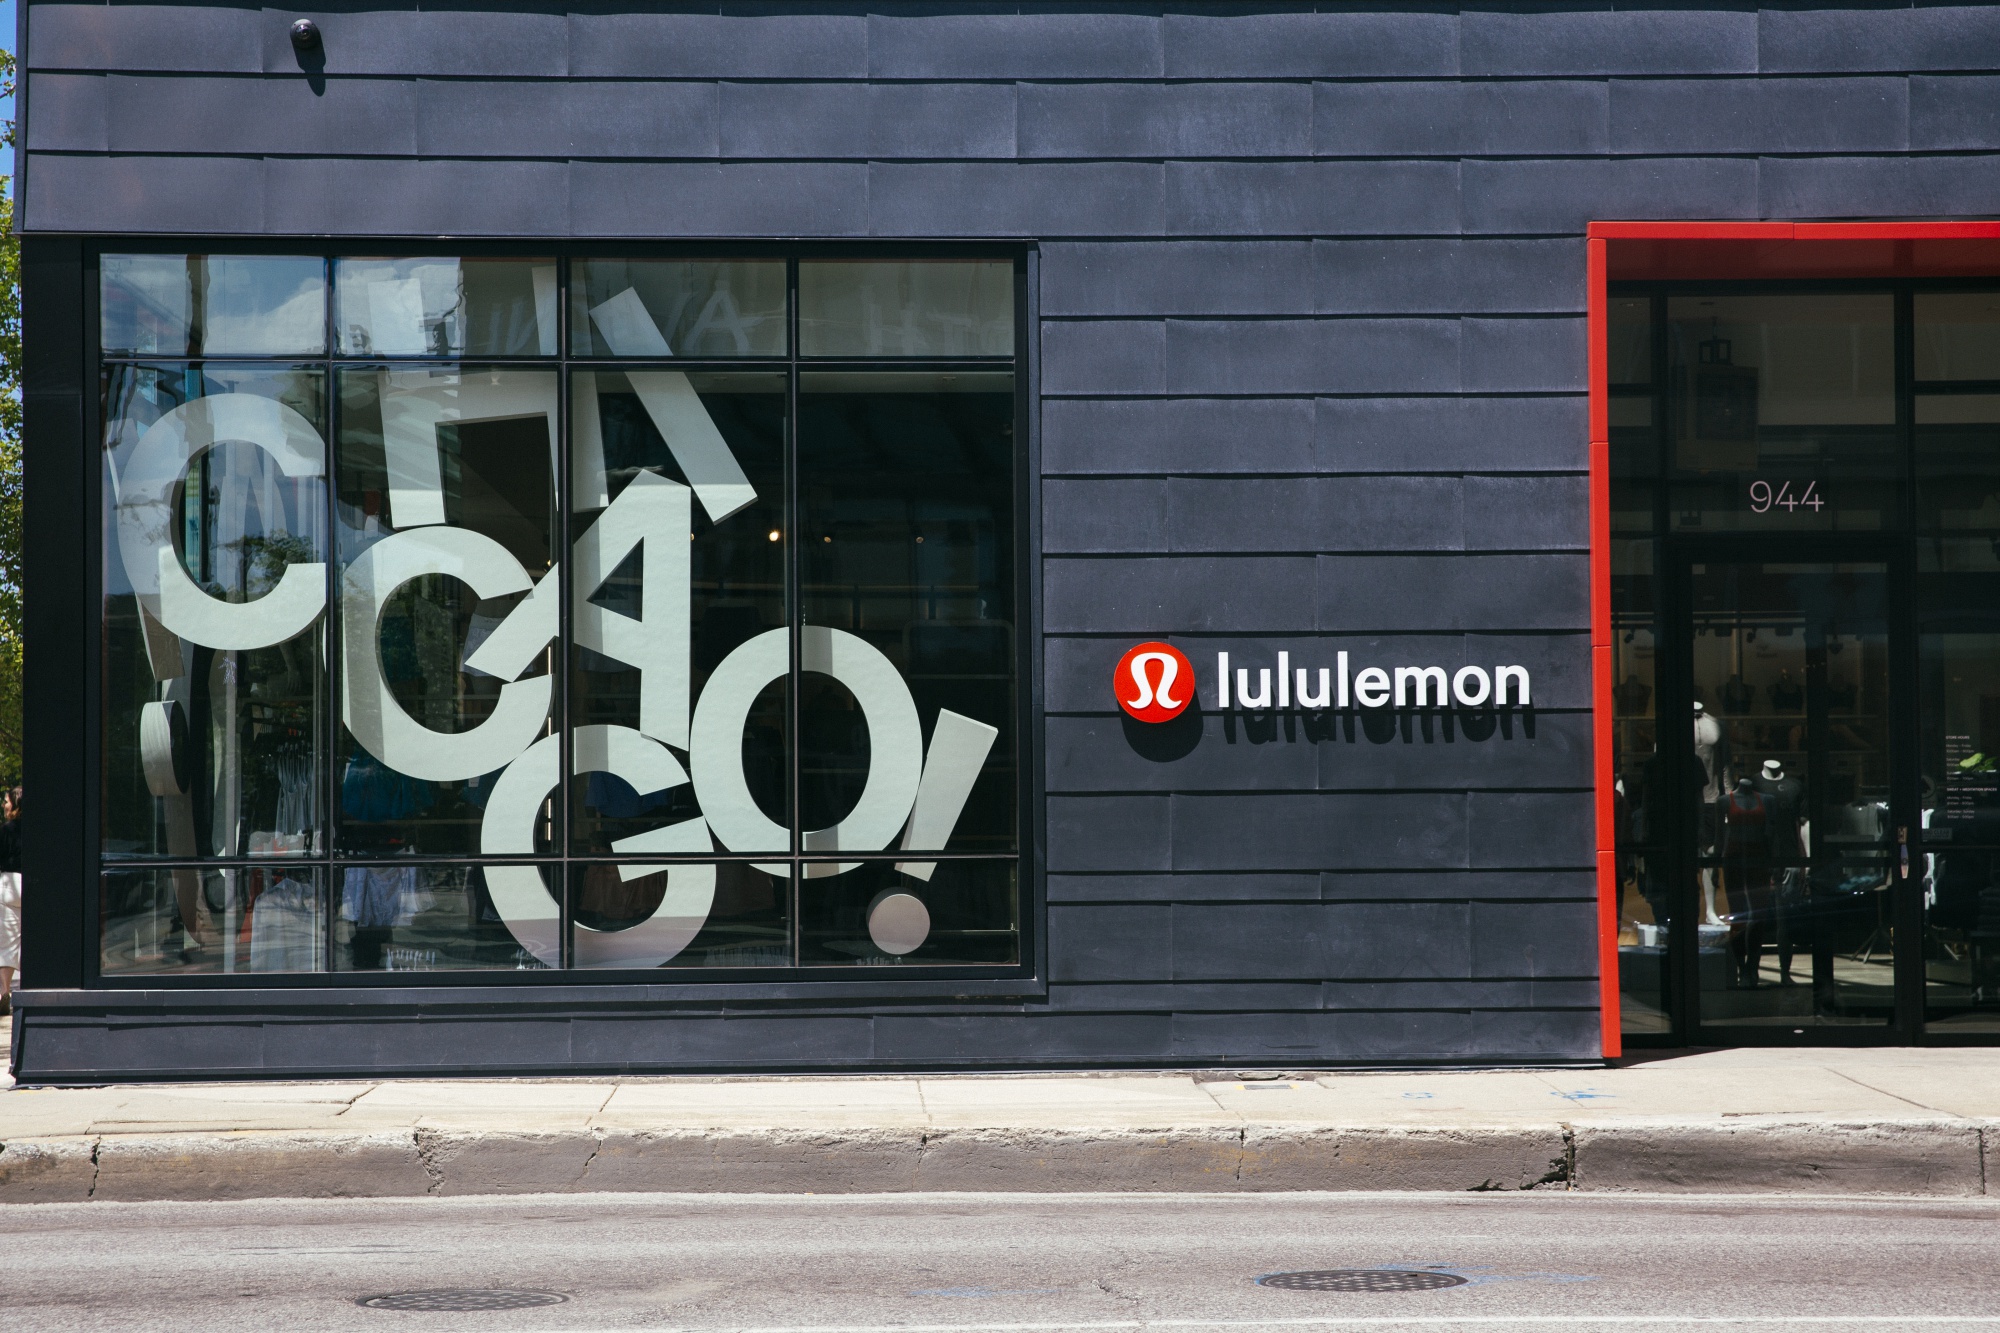 Lululemon, Once Chided for Body-Shaming, to Offer Larger Sizes - Bloomberg